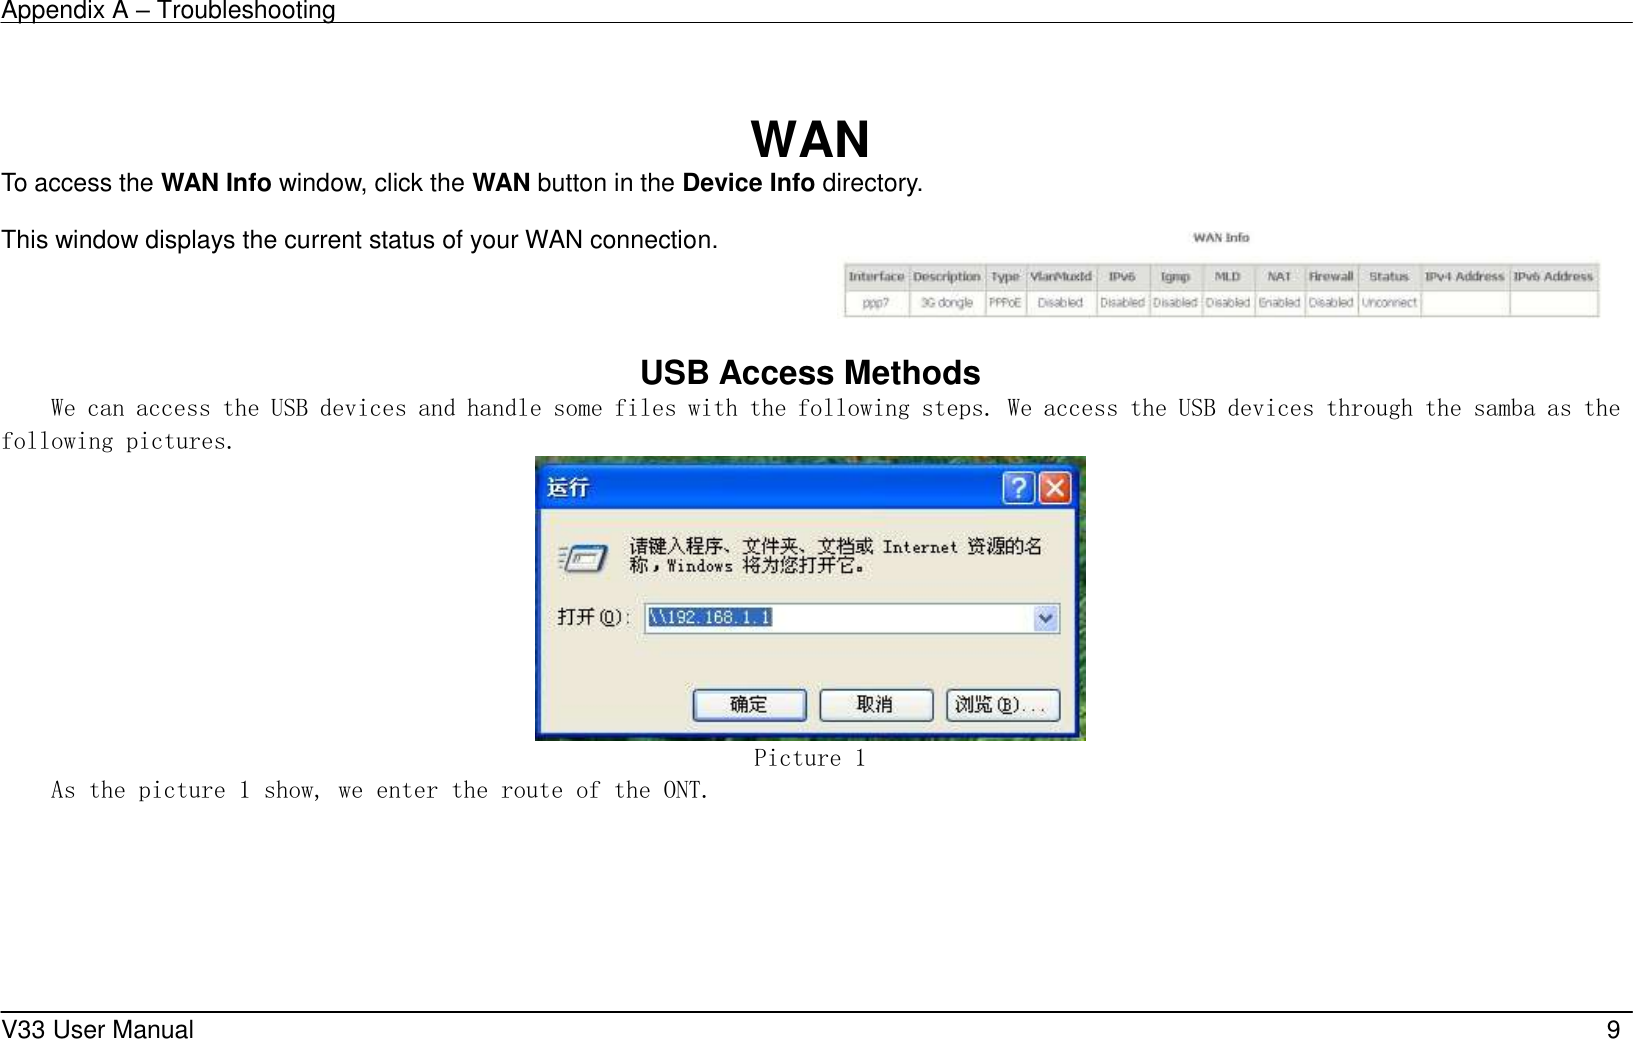 Appendix A – Troubleshooting    V33 User Manual   9  WAN To access the WAN Info window, click the WAN button in the Device Info directory.  This window displays the current status of your WAN connection.   USB Access Methods We can access the USB devices and handle some files with the following steps. We access the USB devices through the samba as the following pictures.  Picture 1 As the picture 1 show, we enter the route of the ONT. 